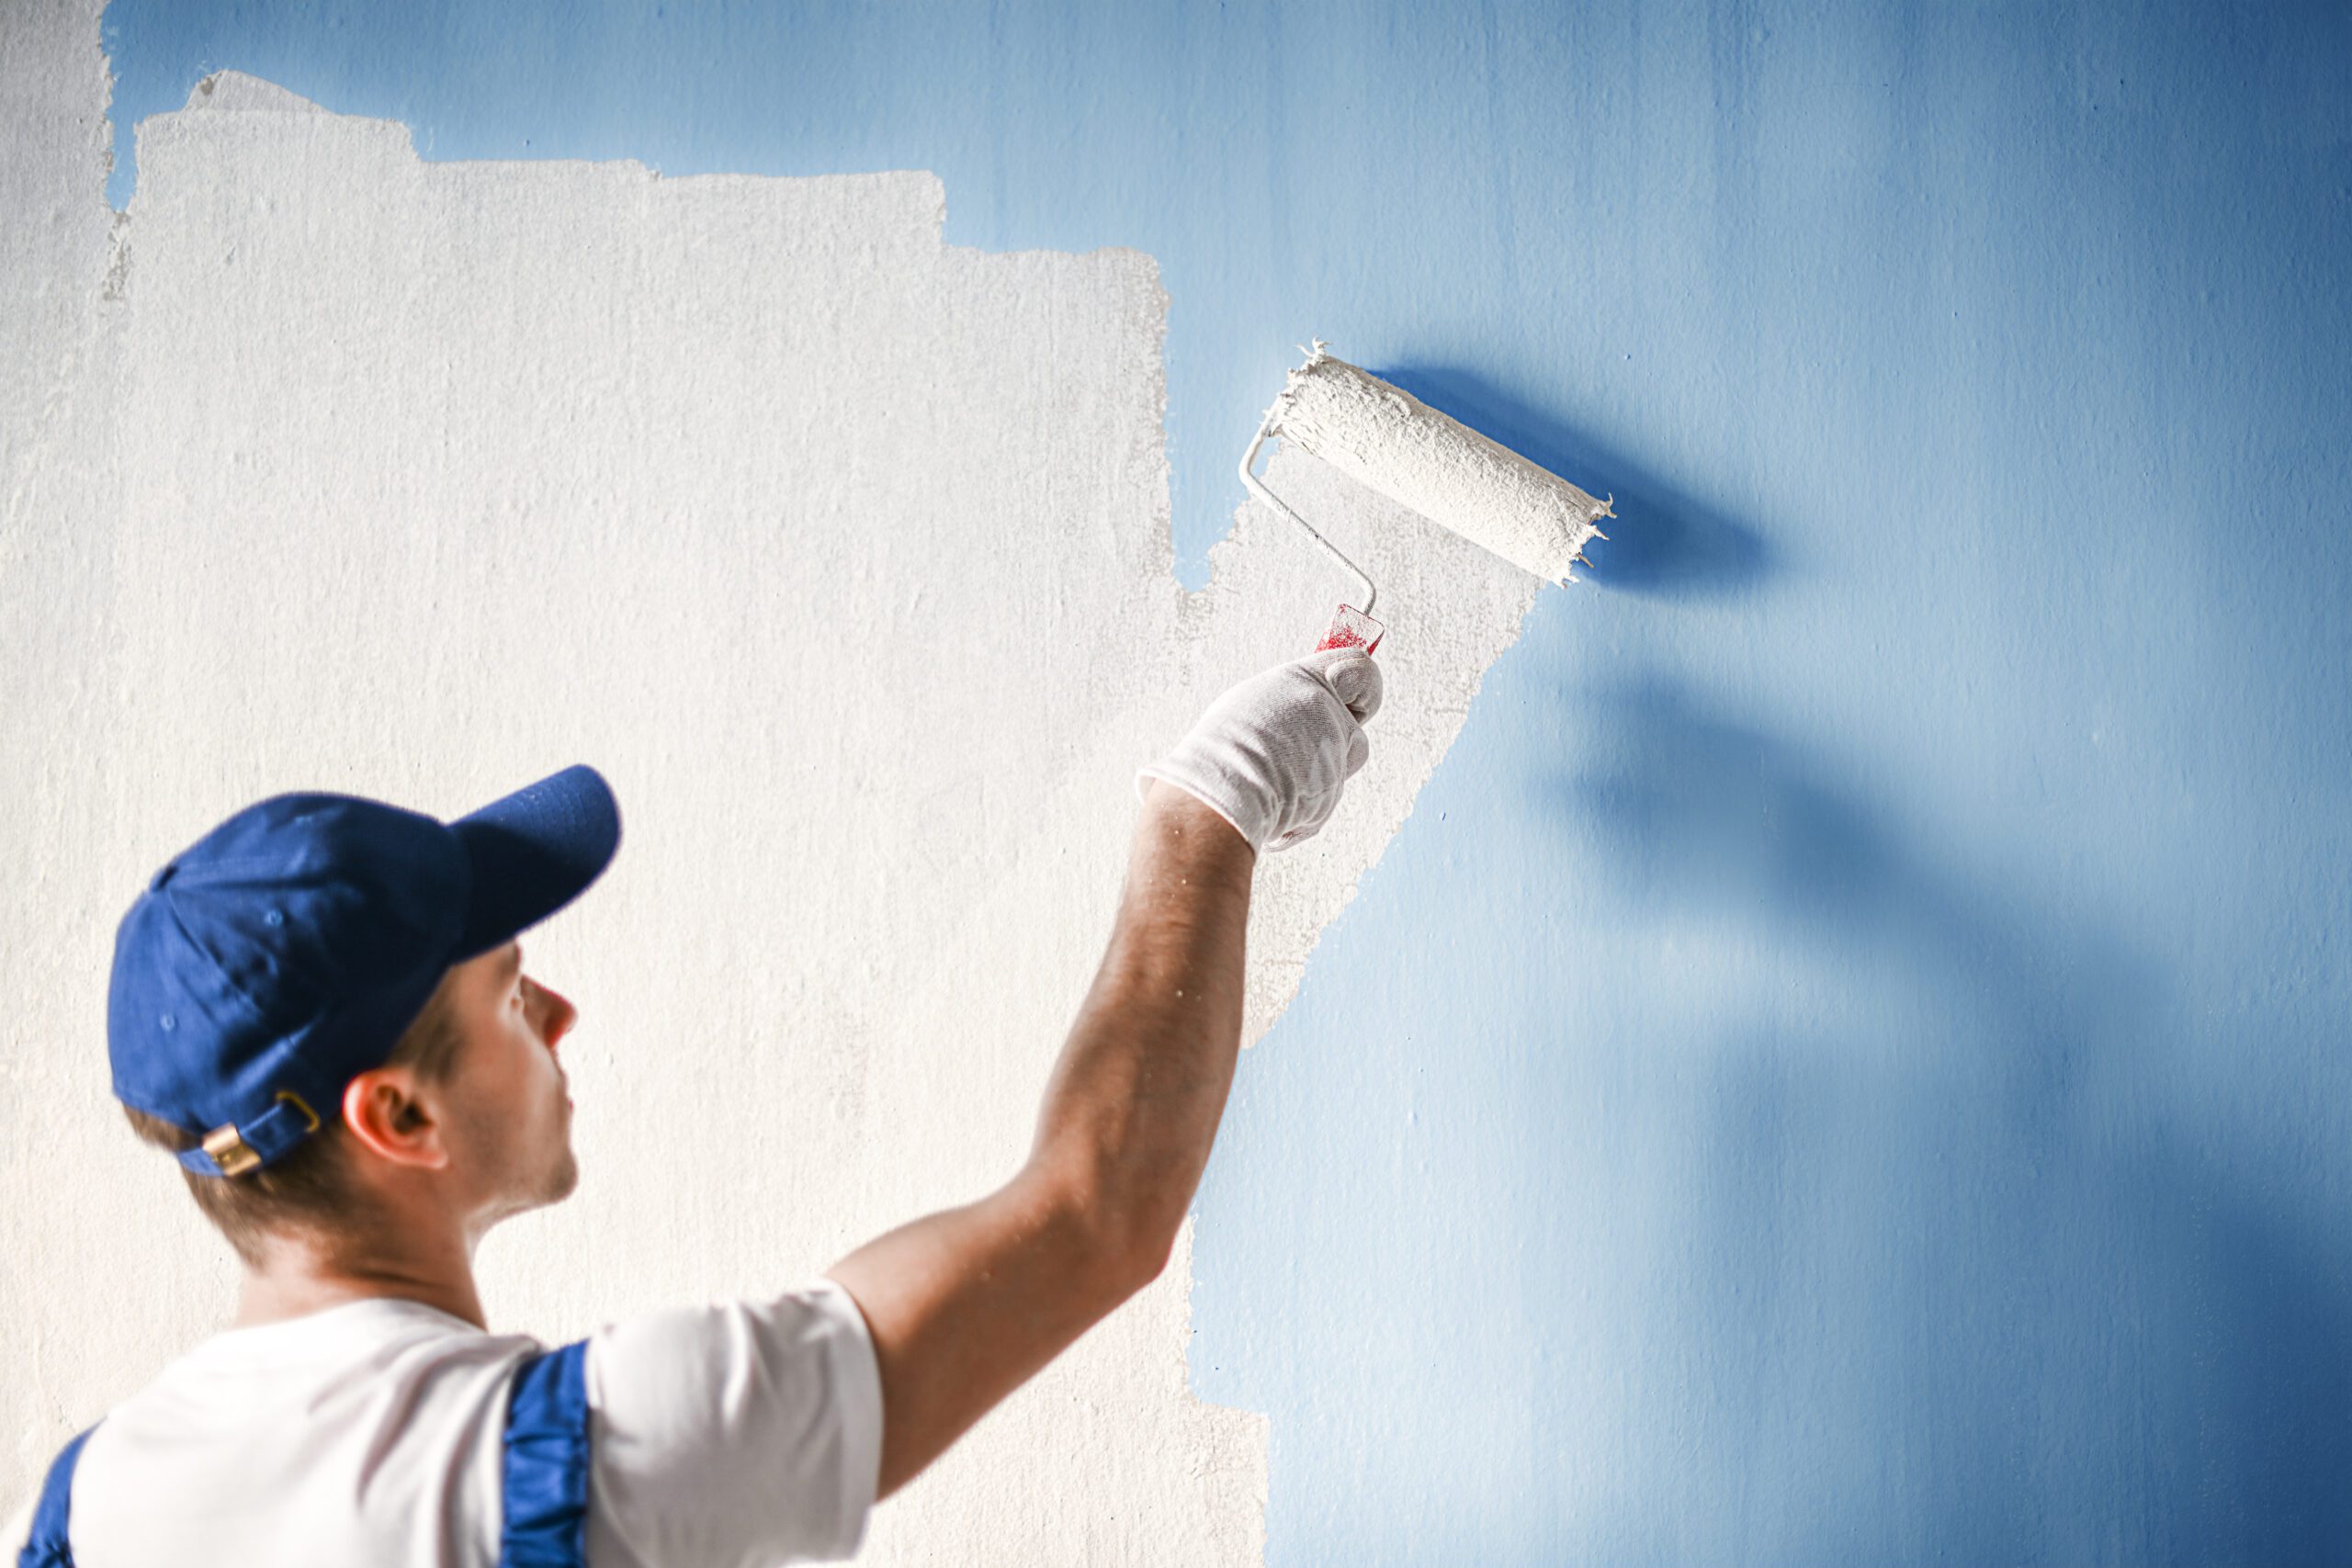 Paramount Painters, LLC is based in York, PA and serves the South Central Pennsylvania and Northern Maryland market for interior, exterior, and commercial painting services.